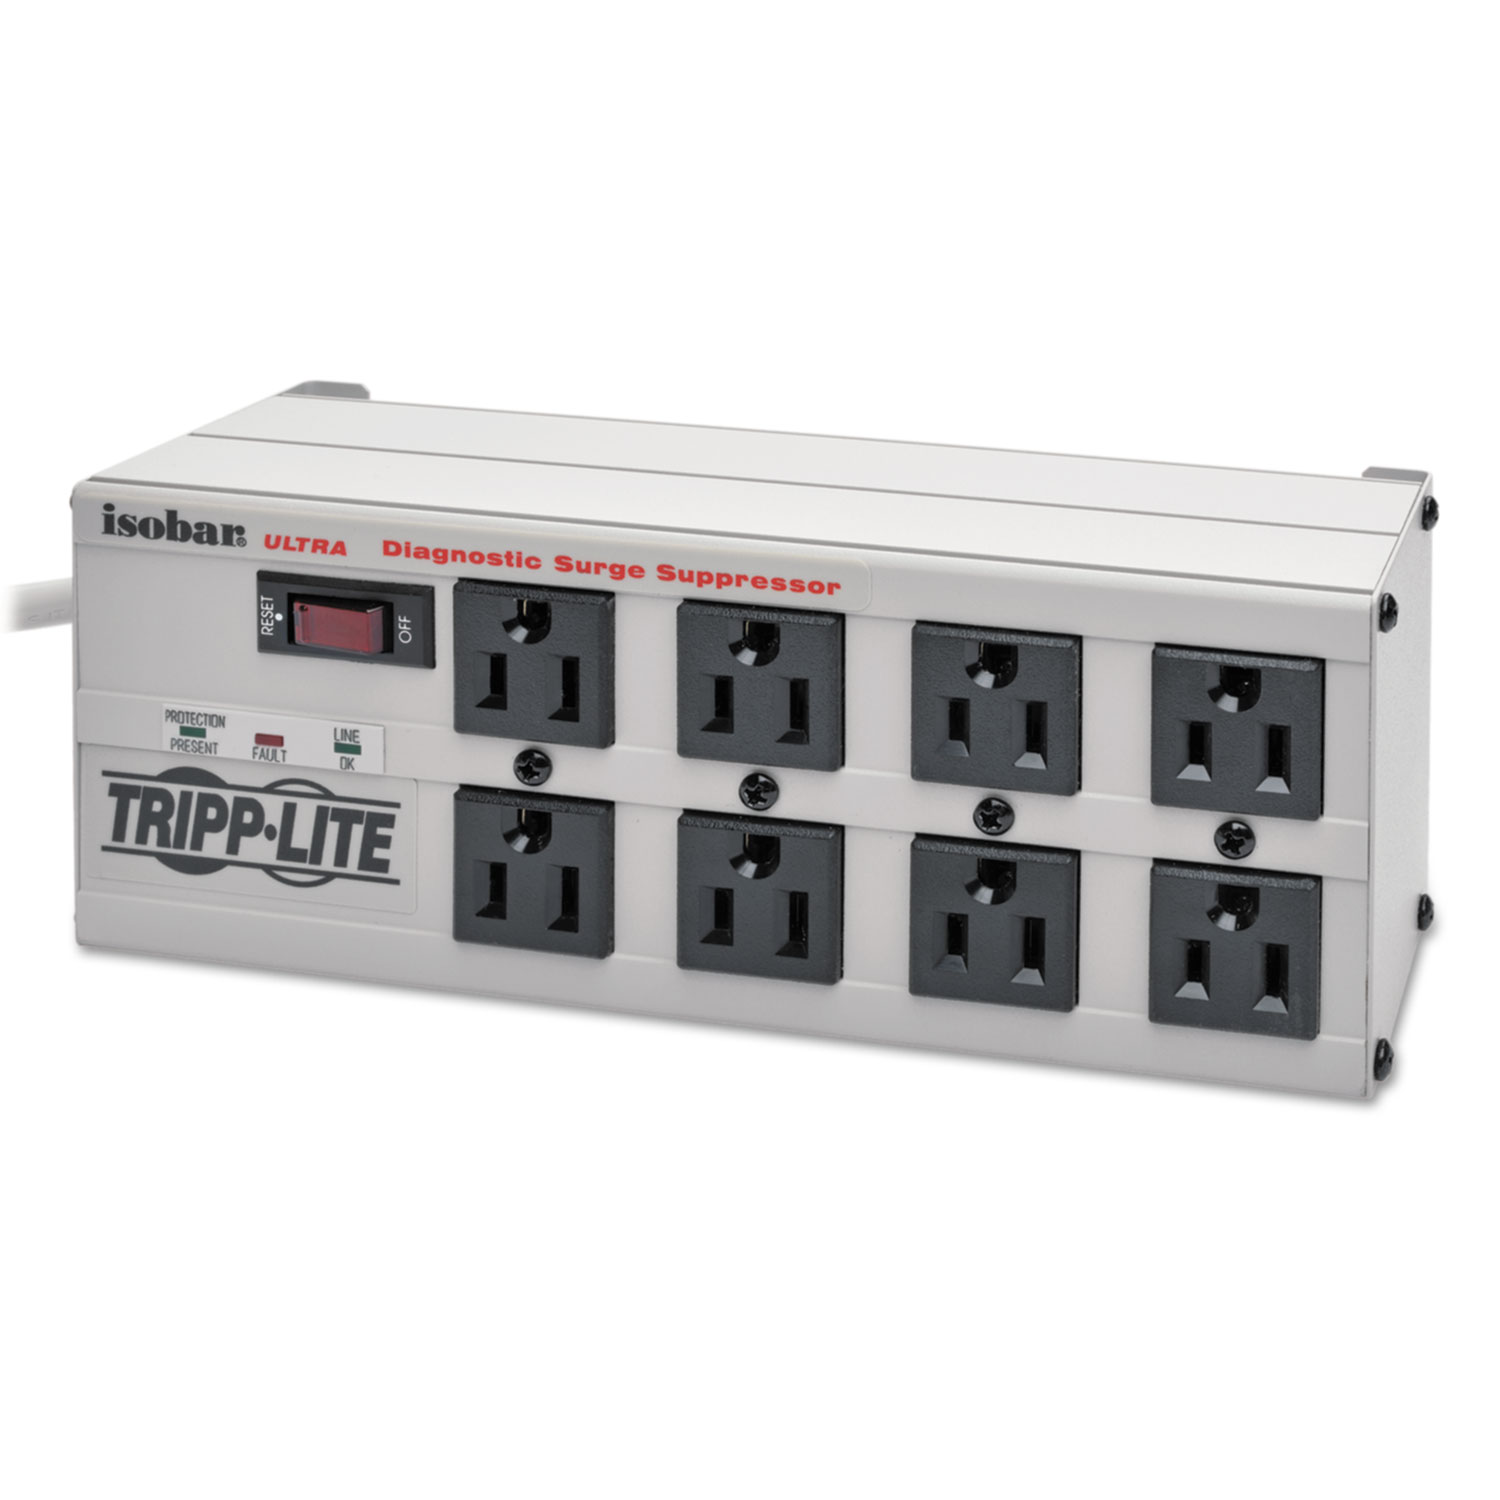  Tripp Lite ISOBAR825ULTRA Isobar Surge Protector, 8 Outlets, 25 ft. Cord, 3840 Joules, Metal Housing (TRPISOBAR825ULT) 